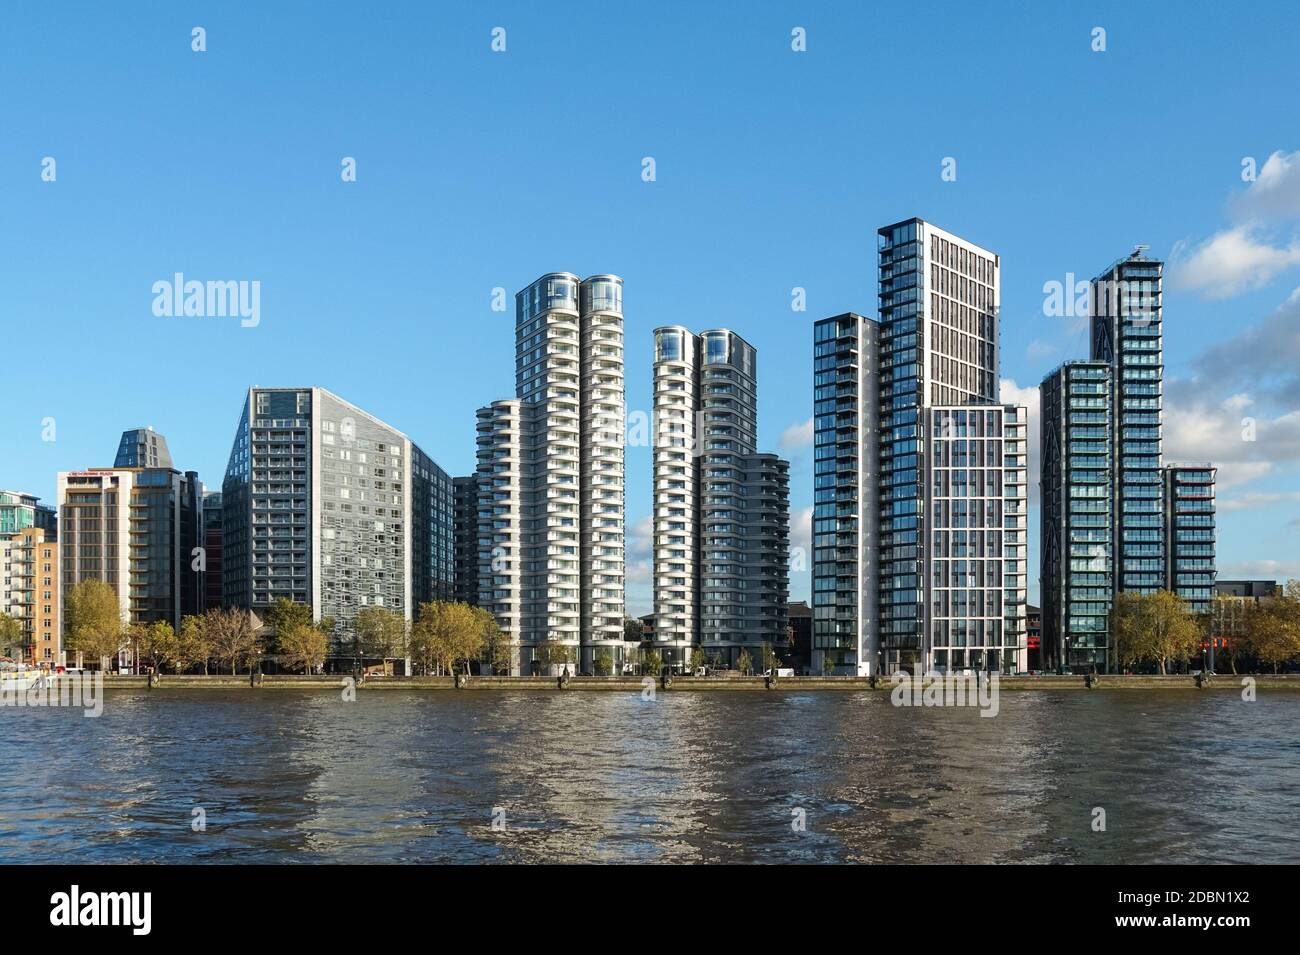 New modern residential buildings with luxury apartments on Albert Embankment in Vauxhall, London, England, United Kingdom, UK Stock Photo